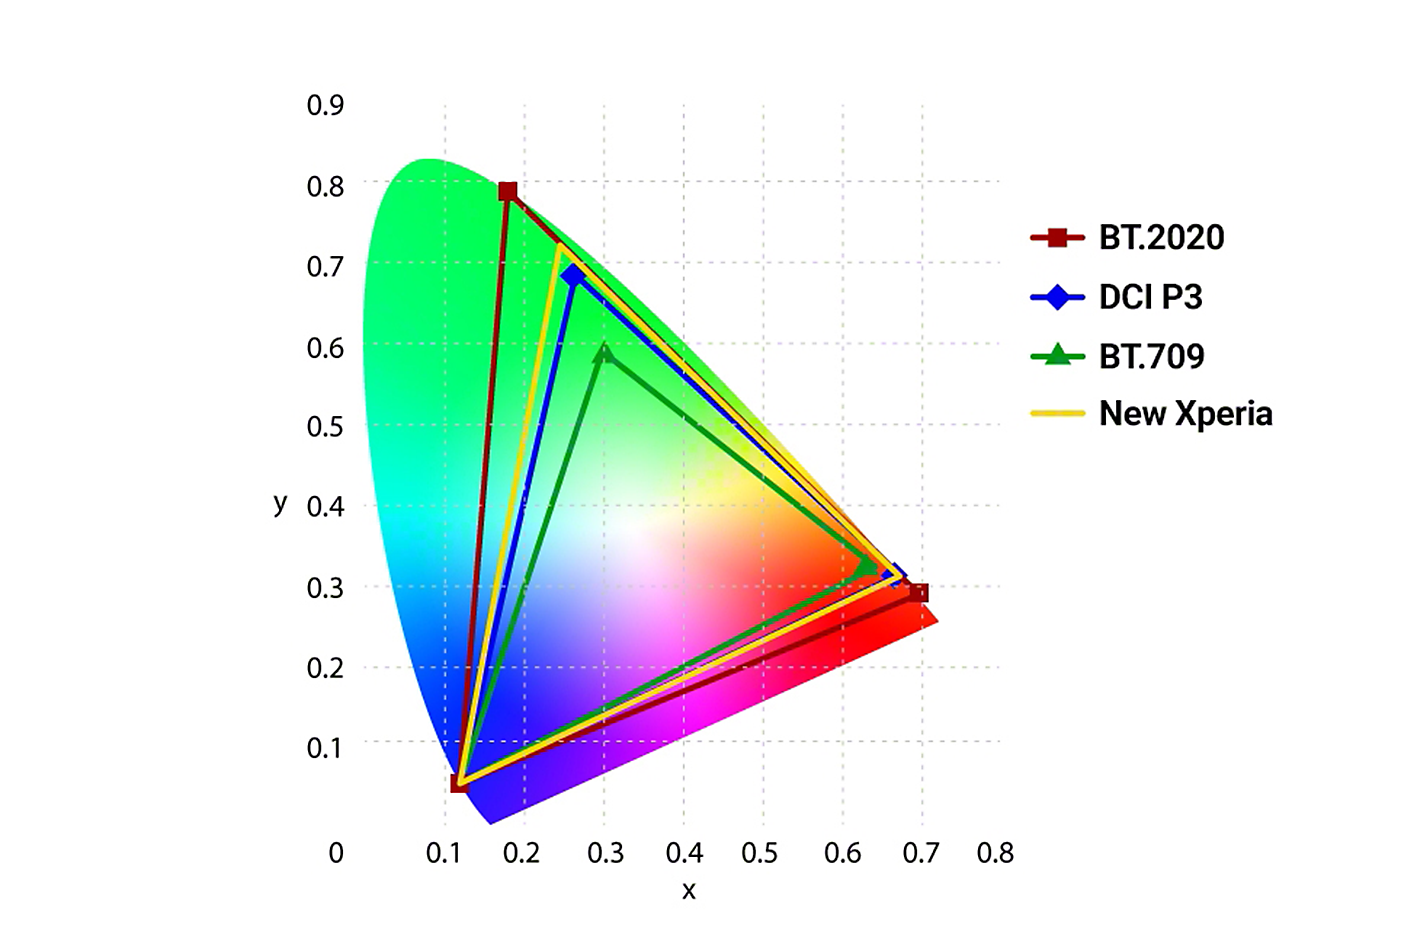 Graphic comparing the colour accuracy of BT.2020, DCI P3, BT.709 and the new Xperia